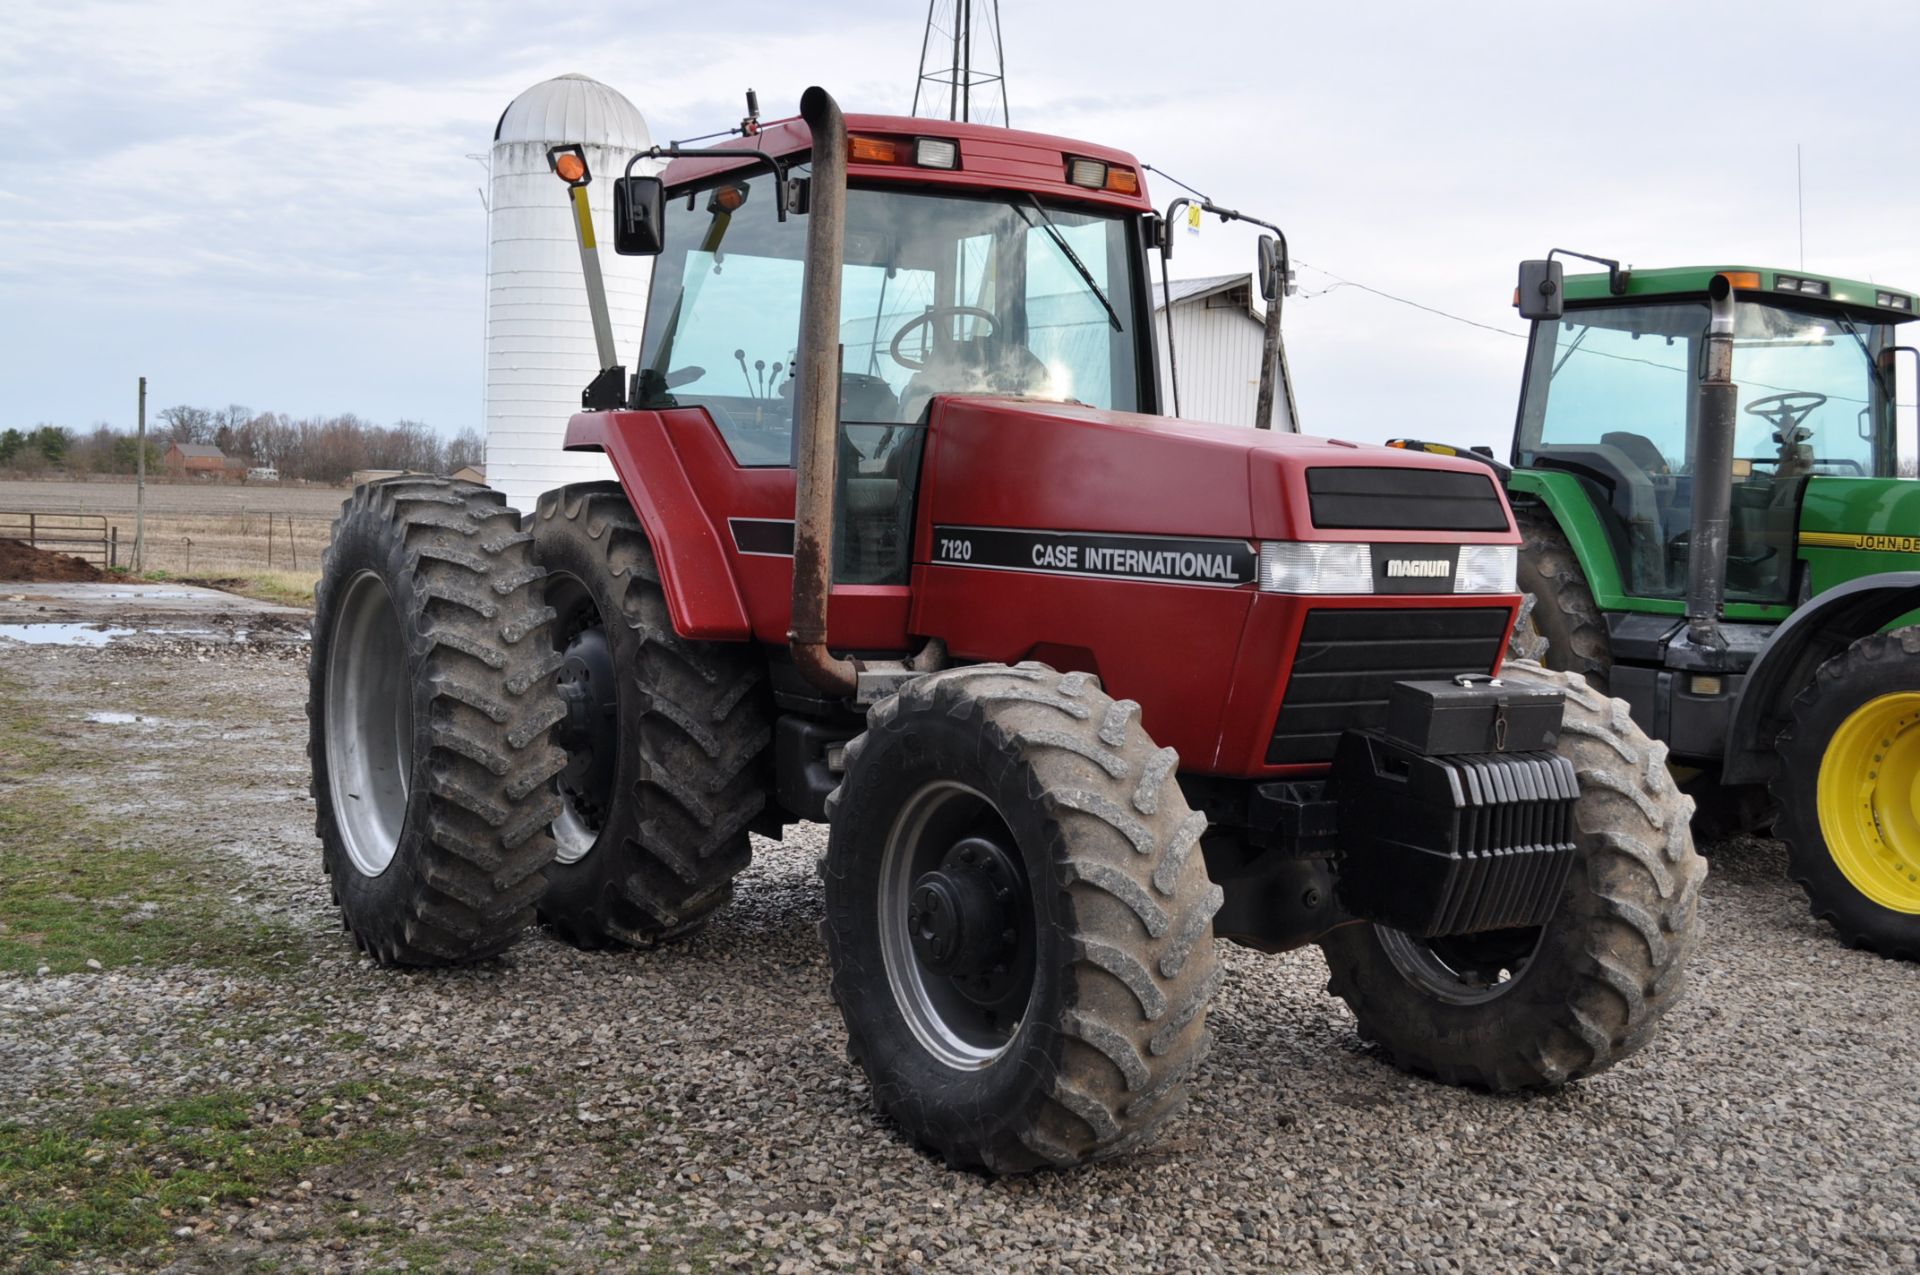 Case IH 7120 MFWD tractor, 480/80 R 42 duals, 480/65 R 28 front, 3 hyd remotes, 540/1000 pto, 3 - Image 4 of 16